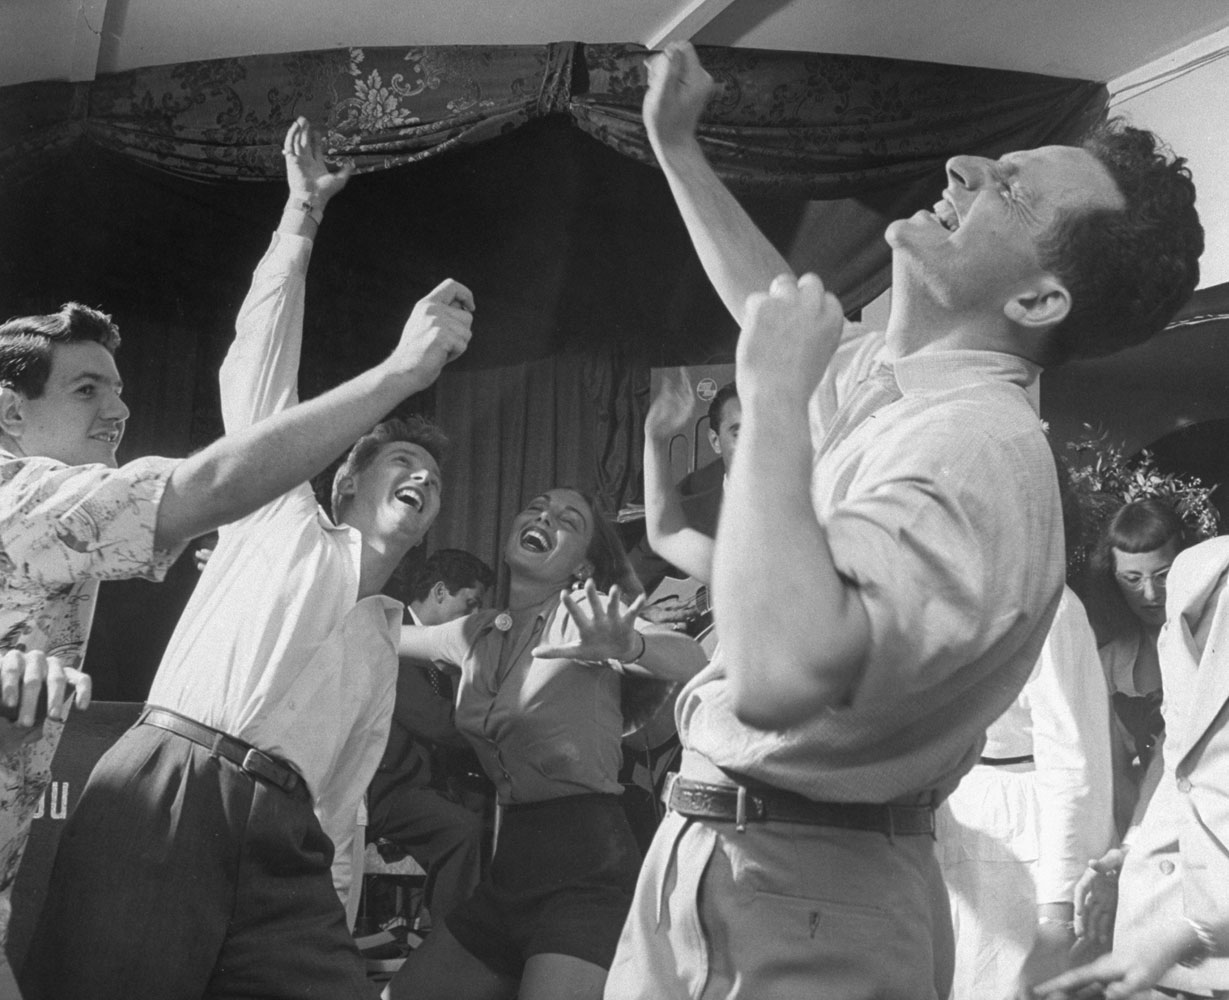 Milton Hood Ward (right) leads his "Activationist" followers on the dance floor, Cape Cod, 1948.